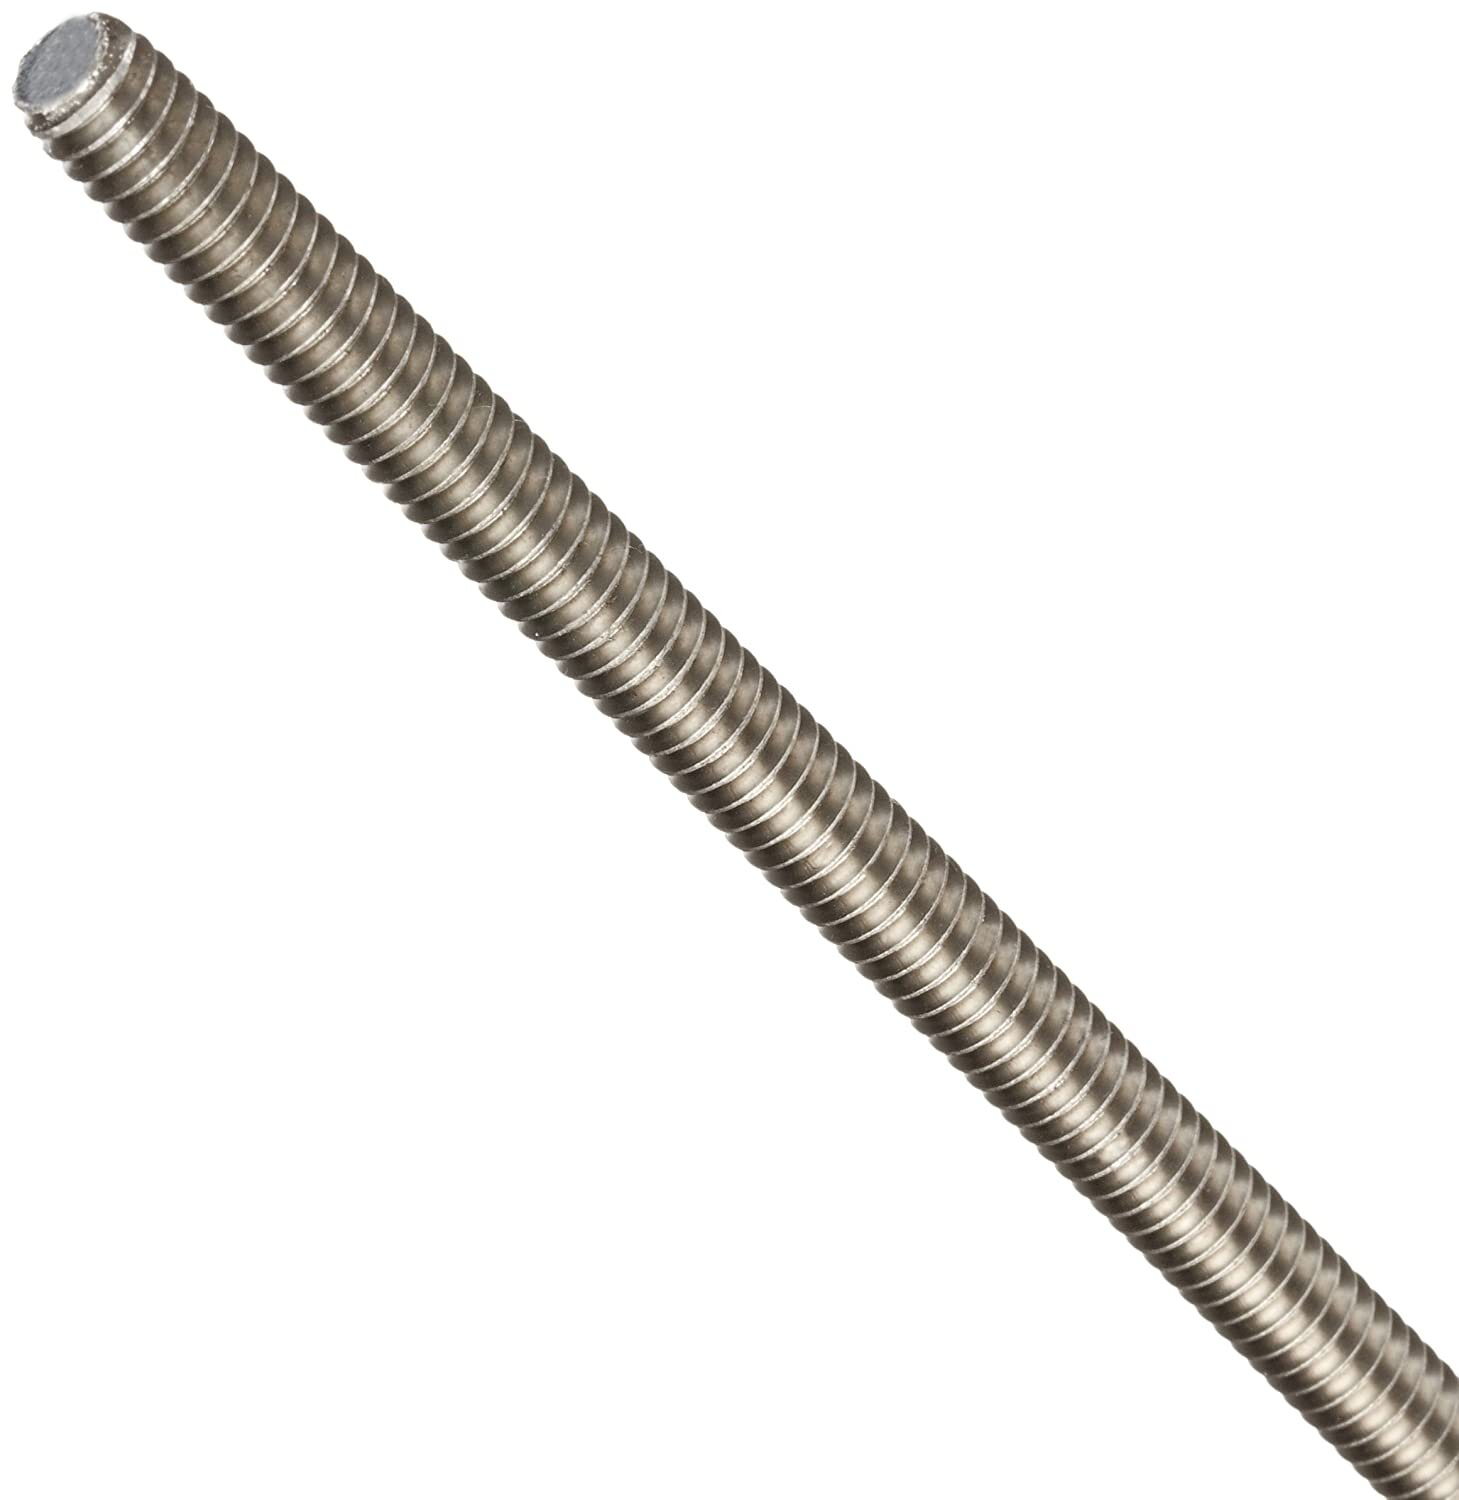 Made in USA Fully Threaded Rod in 18-8 or 316